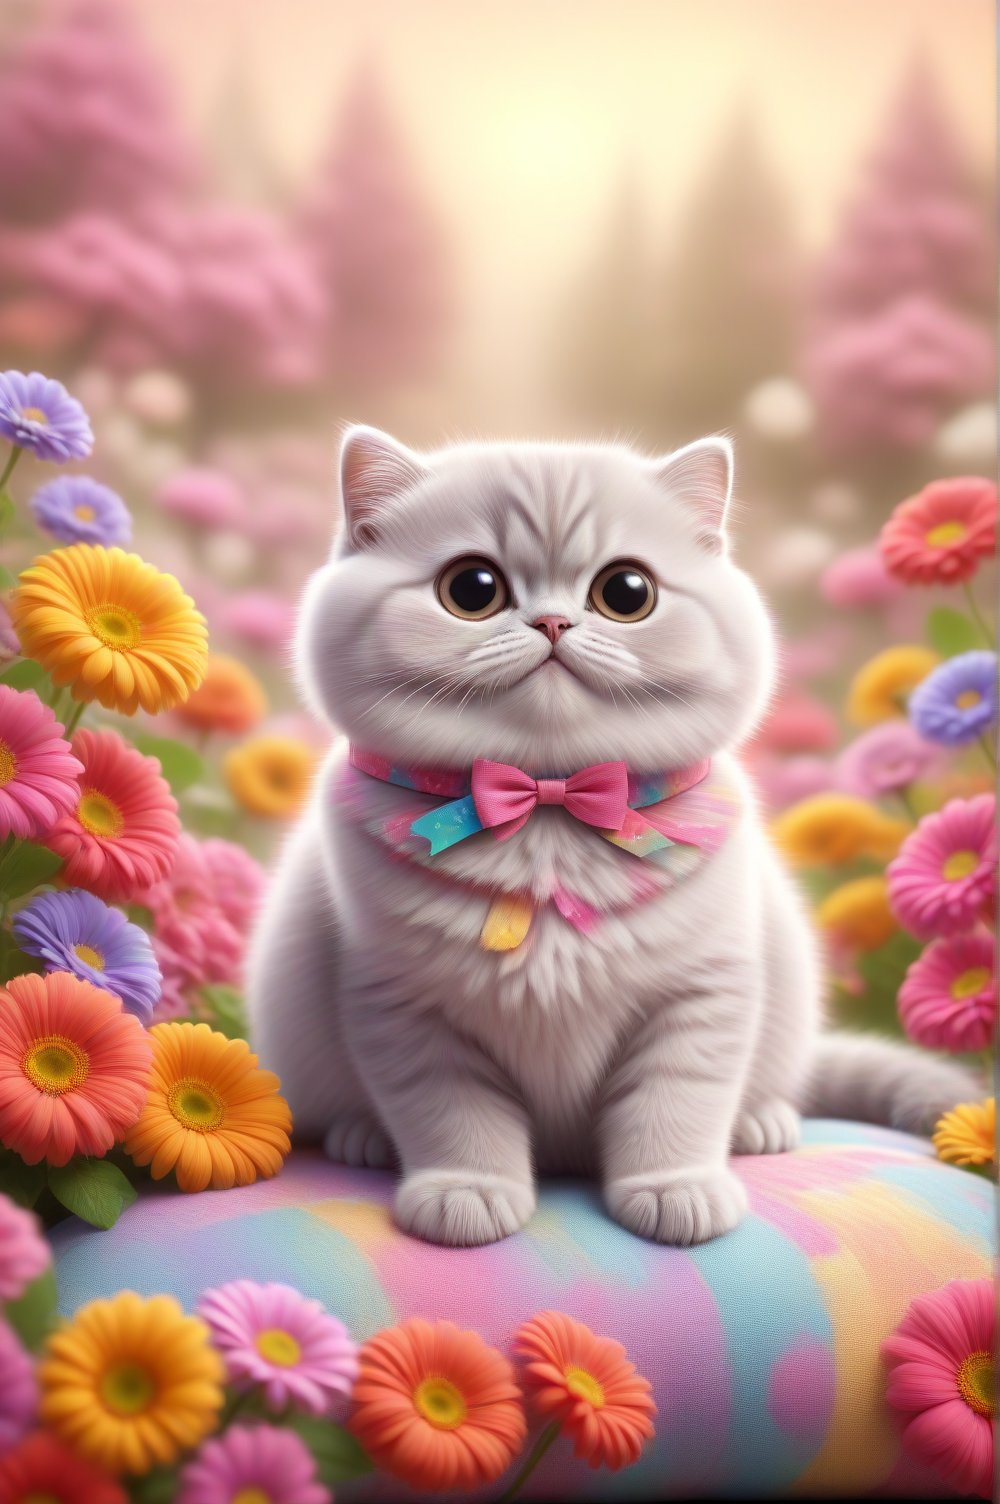 Beautiful kitten (Scottish Fold cat) sitting on a solid color cushion and smiling with a bow around her neck, surrounded by colorful flowers.  Super cute digital illustration, probably created on a graphics tablet and illustration software, from the contemporary era, using a vibrant, desaturated color palette and colorful flowers.  The background is a dreamy fairytale scene with a summer open air sky.,<lora:659095807385103906:1.0>